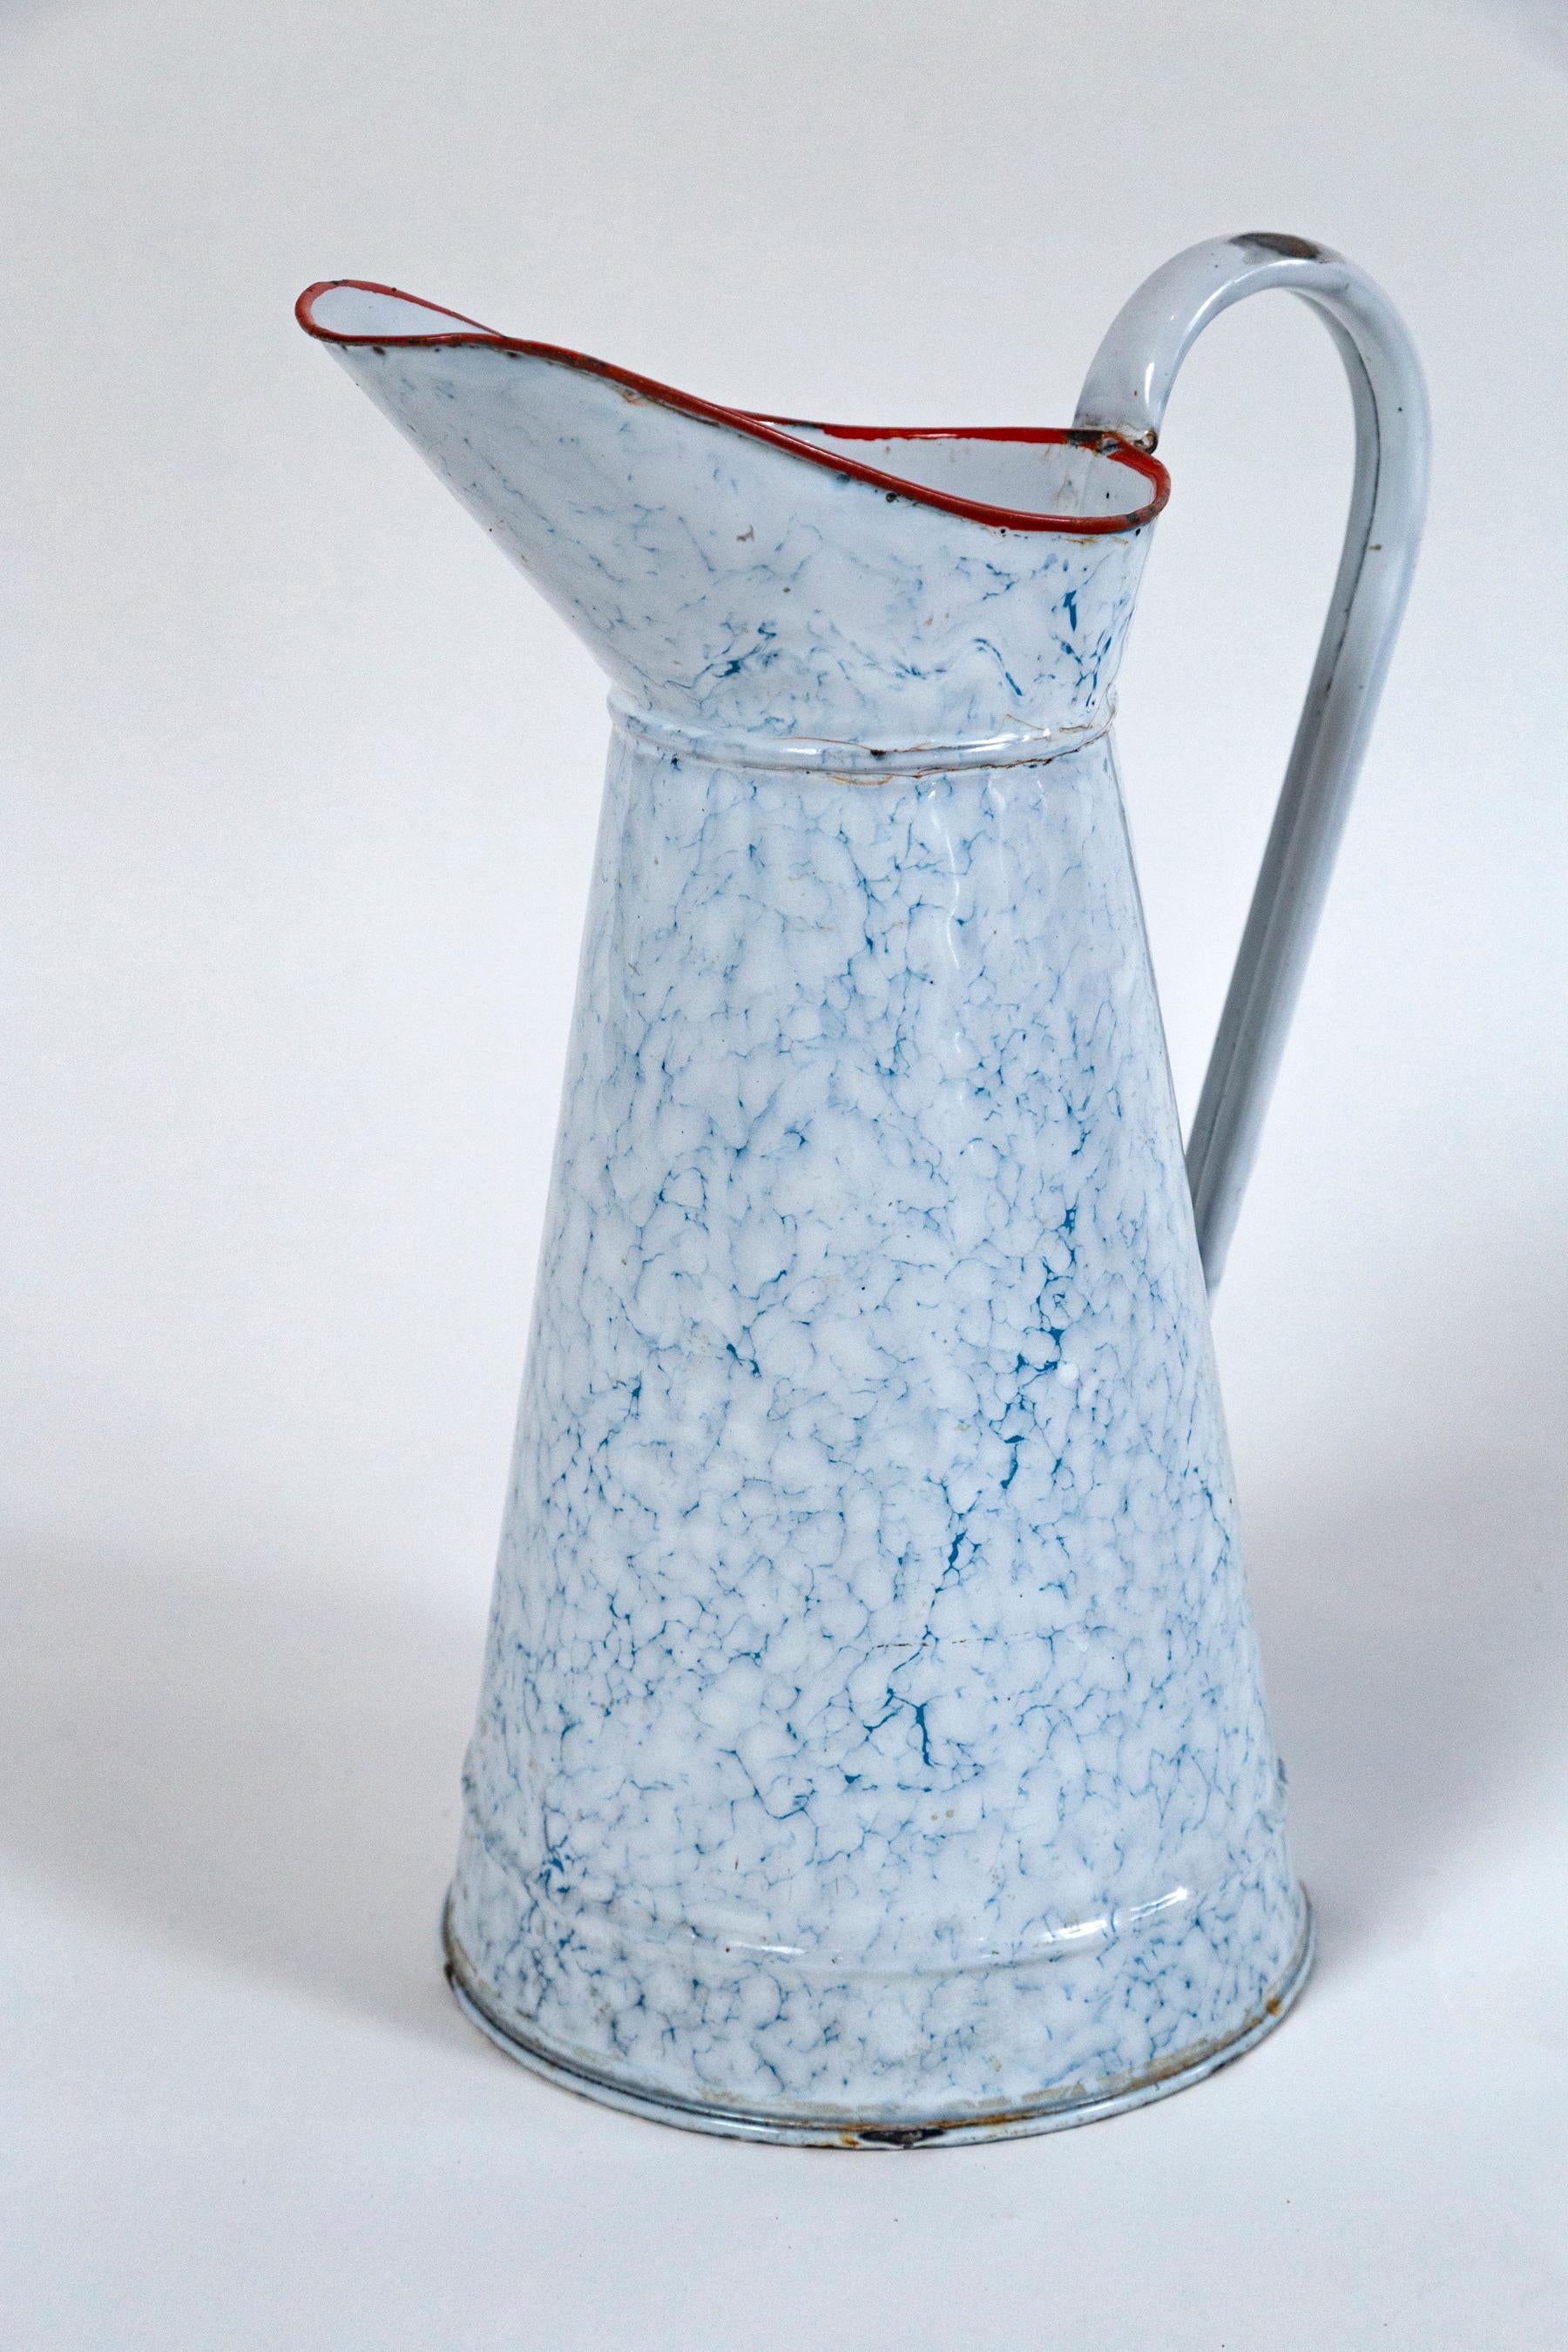 Vintage French blue and white Enamelware pitcher, circa 1920's. Tall, blue and white marbled pitcher with red rim.